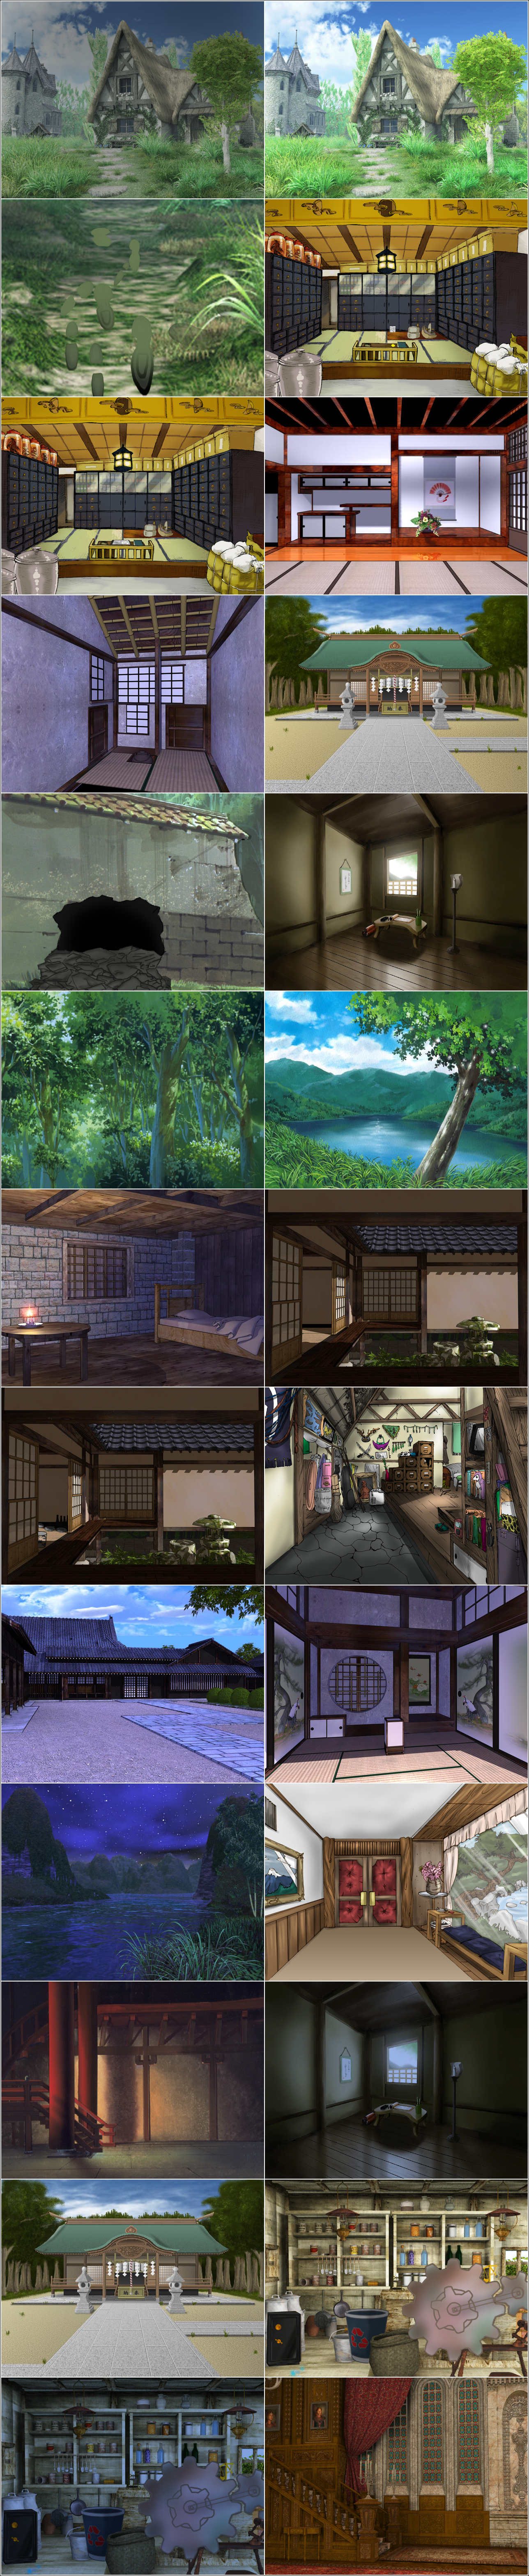 Backgrounds (1/2)